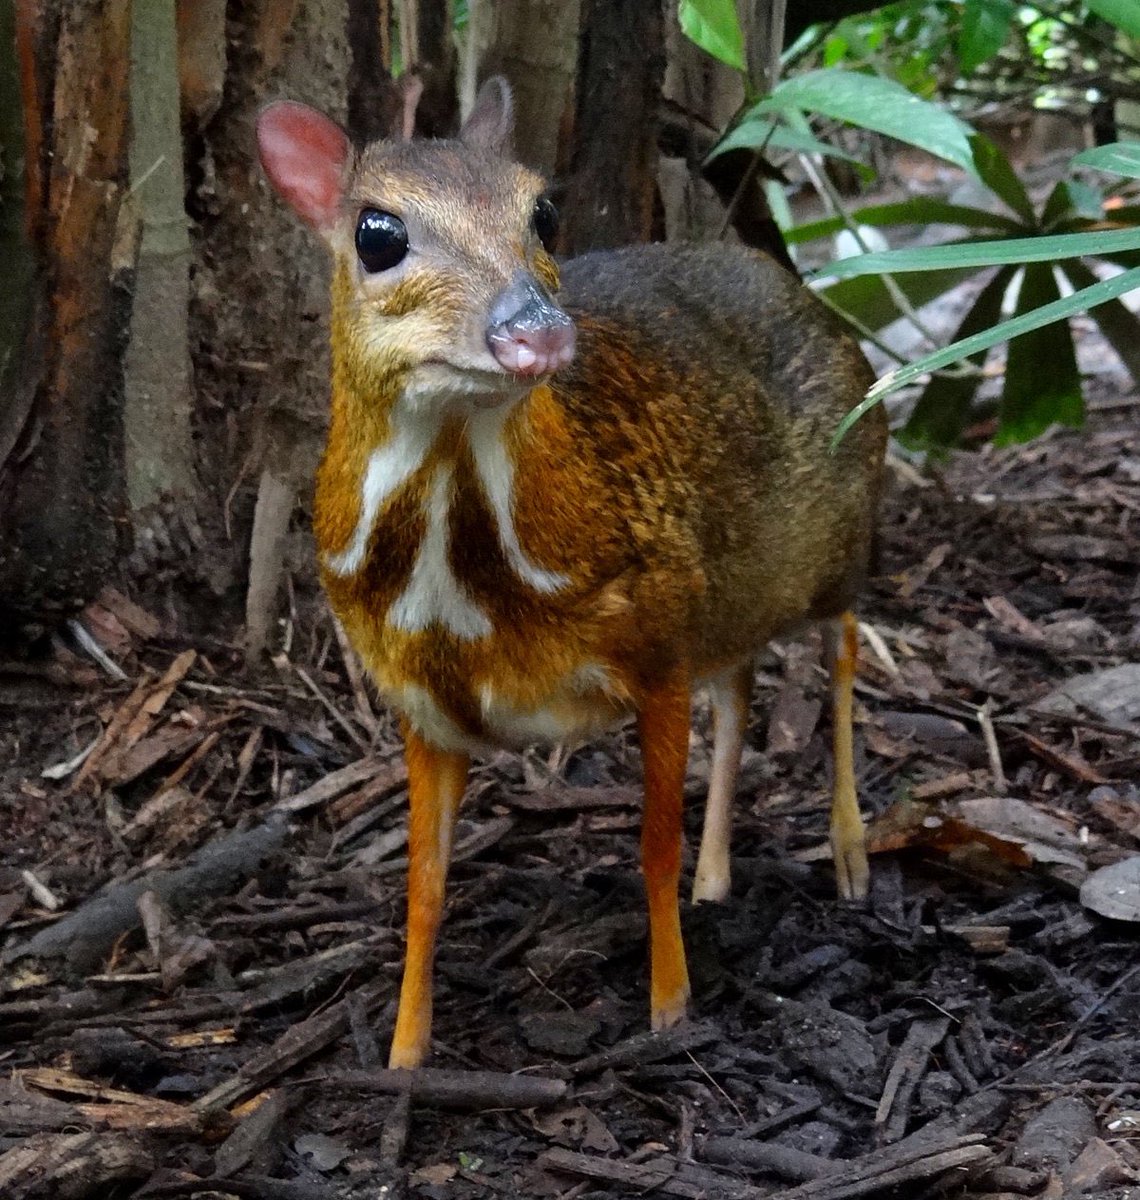 25. Chevrotain are animals that look like a tiny deer with fangs.